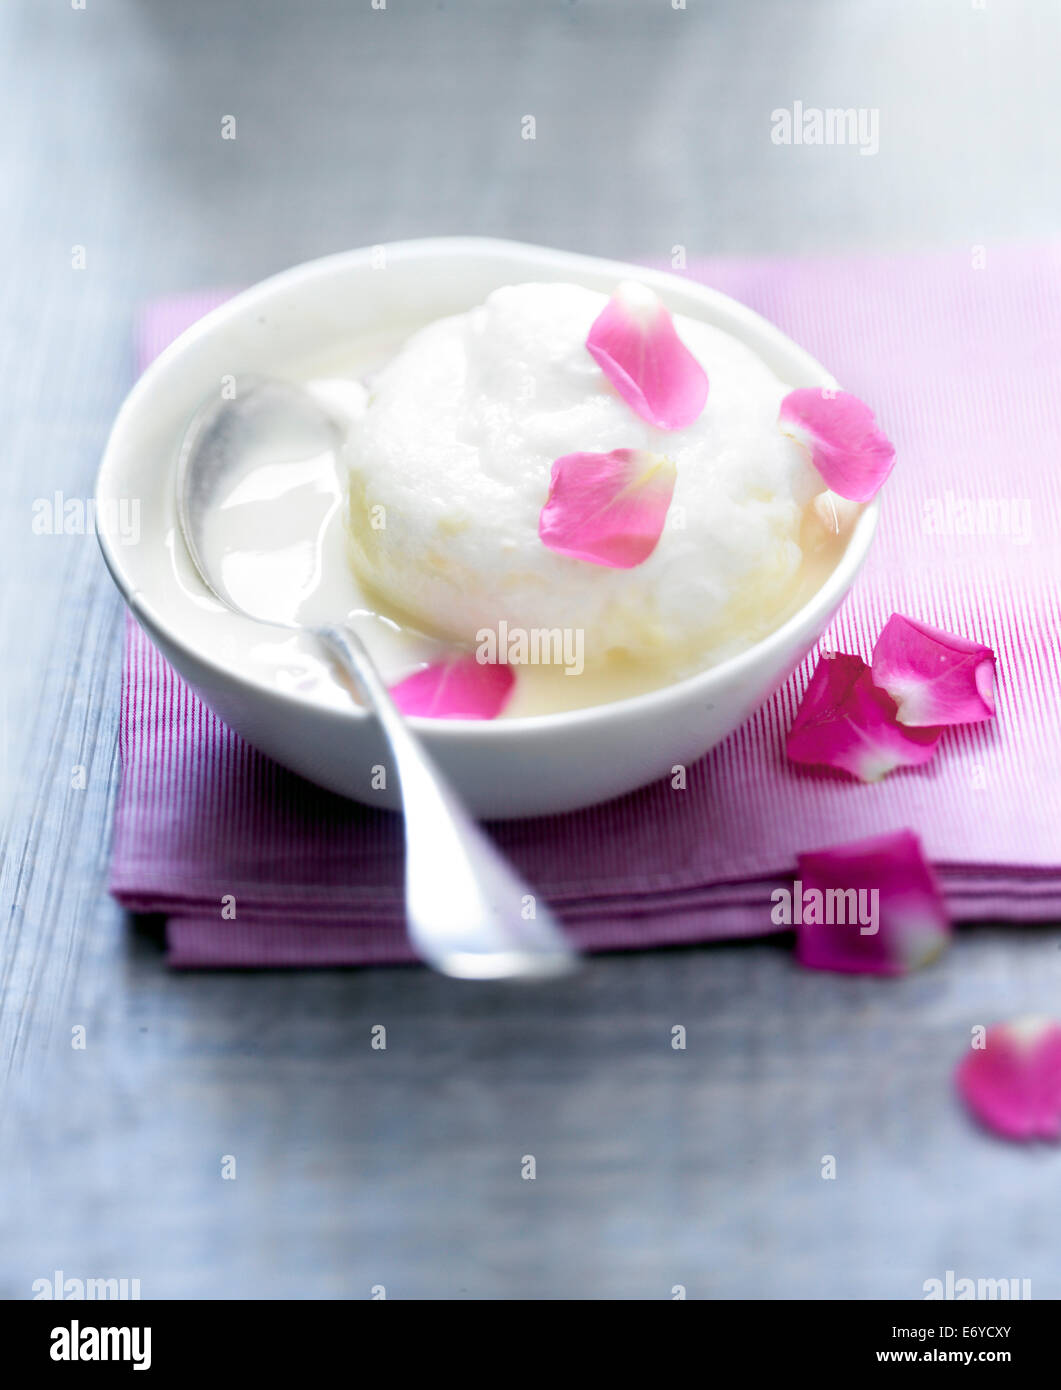 Rose-flavored floating island Stock Photo